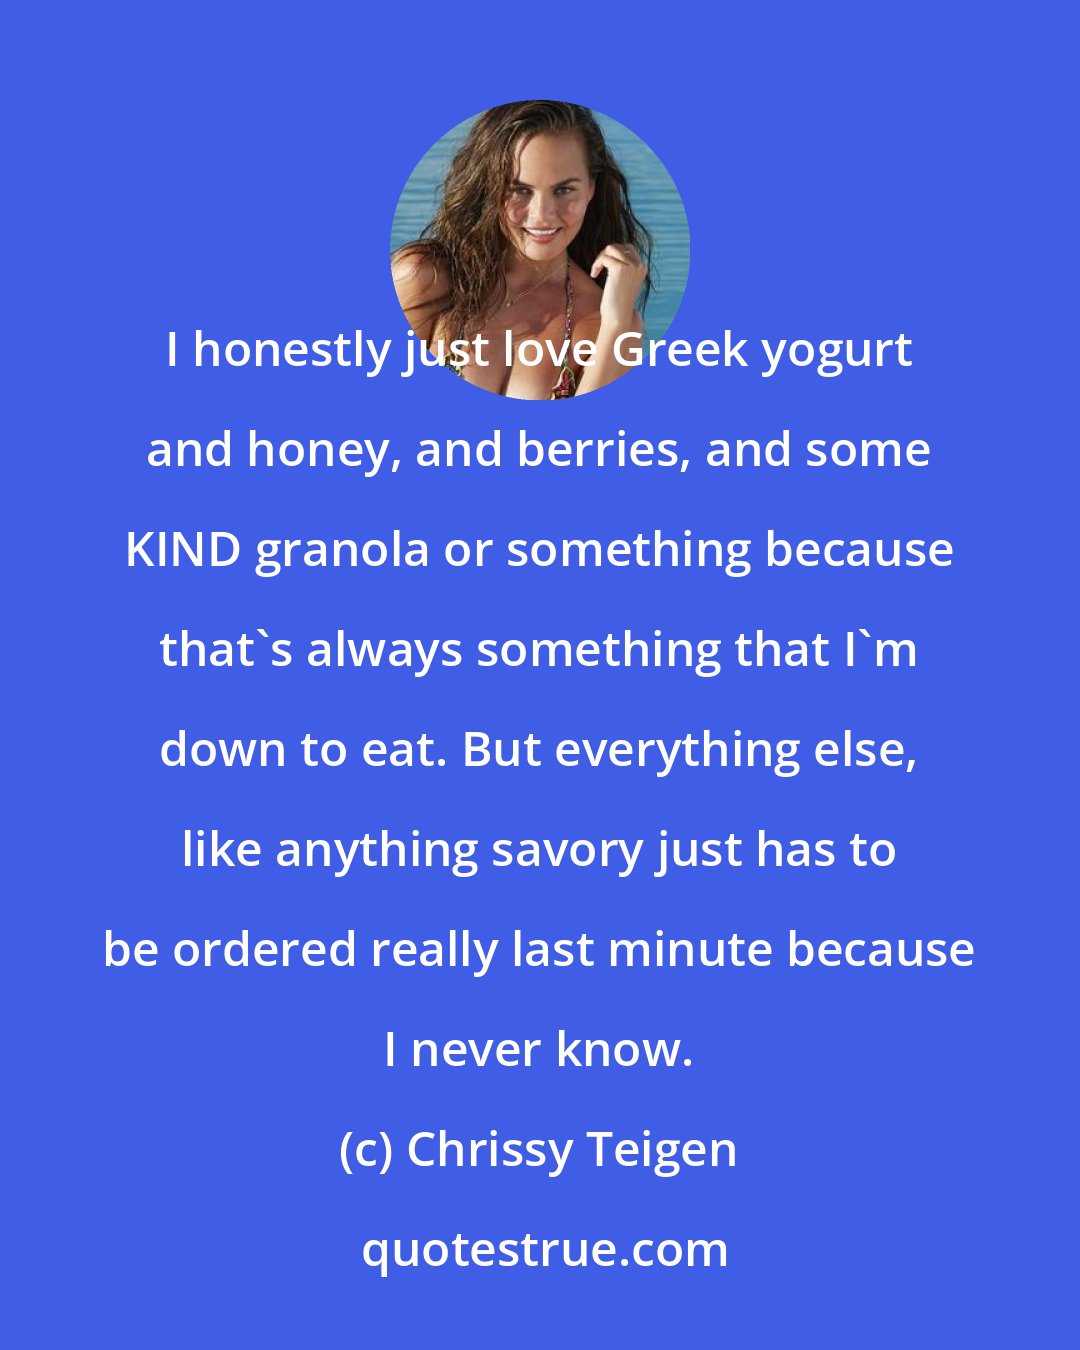 Chrissy Teigen: I honestly just love Greek yogurt and honey, and berries, and some KIND granola or something because that's always something that I'm down to eat. But everything else, like anything savory just has to be ordered really last minute because I never know.